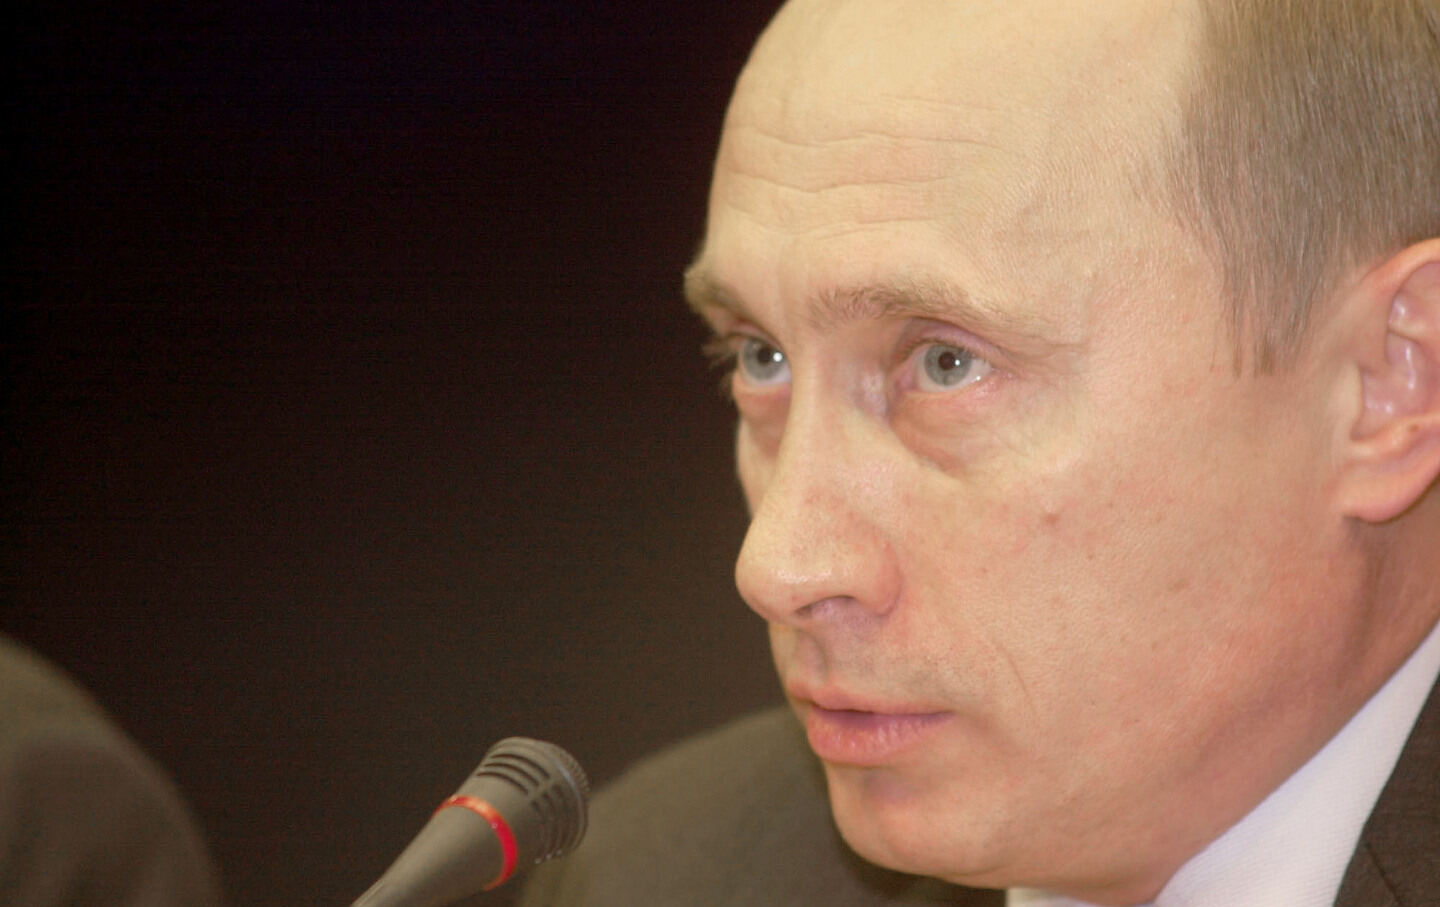 Russian President Vladimir Putin speaks at a press conference following the EU-Russia summit on November 11, 2002, in Brussels, Belgium.